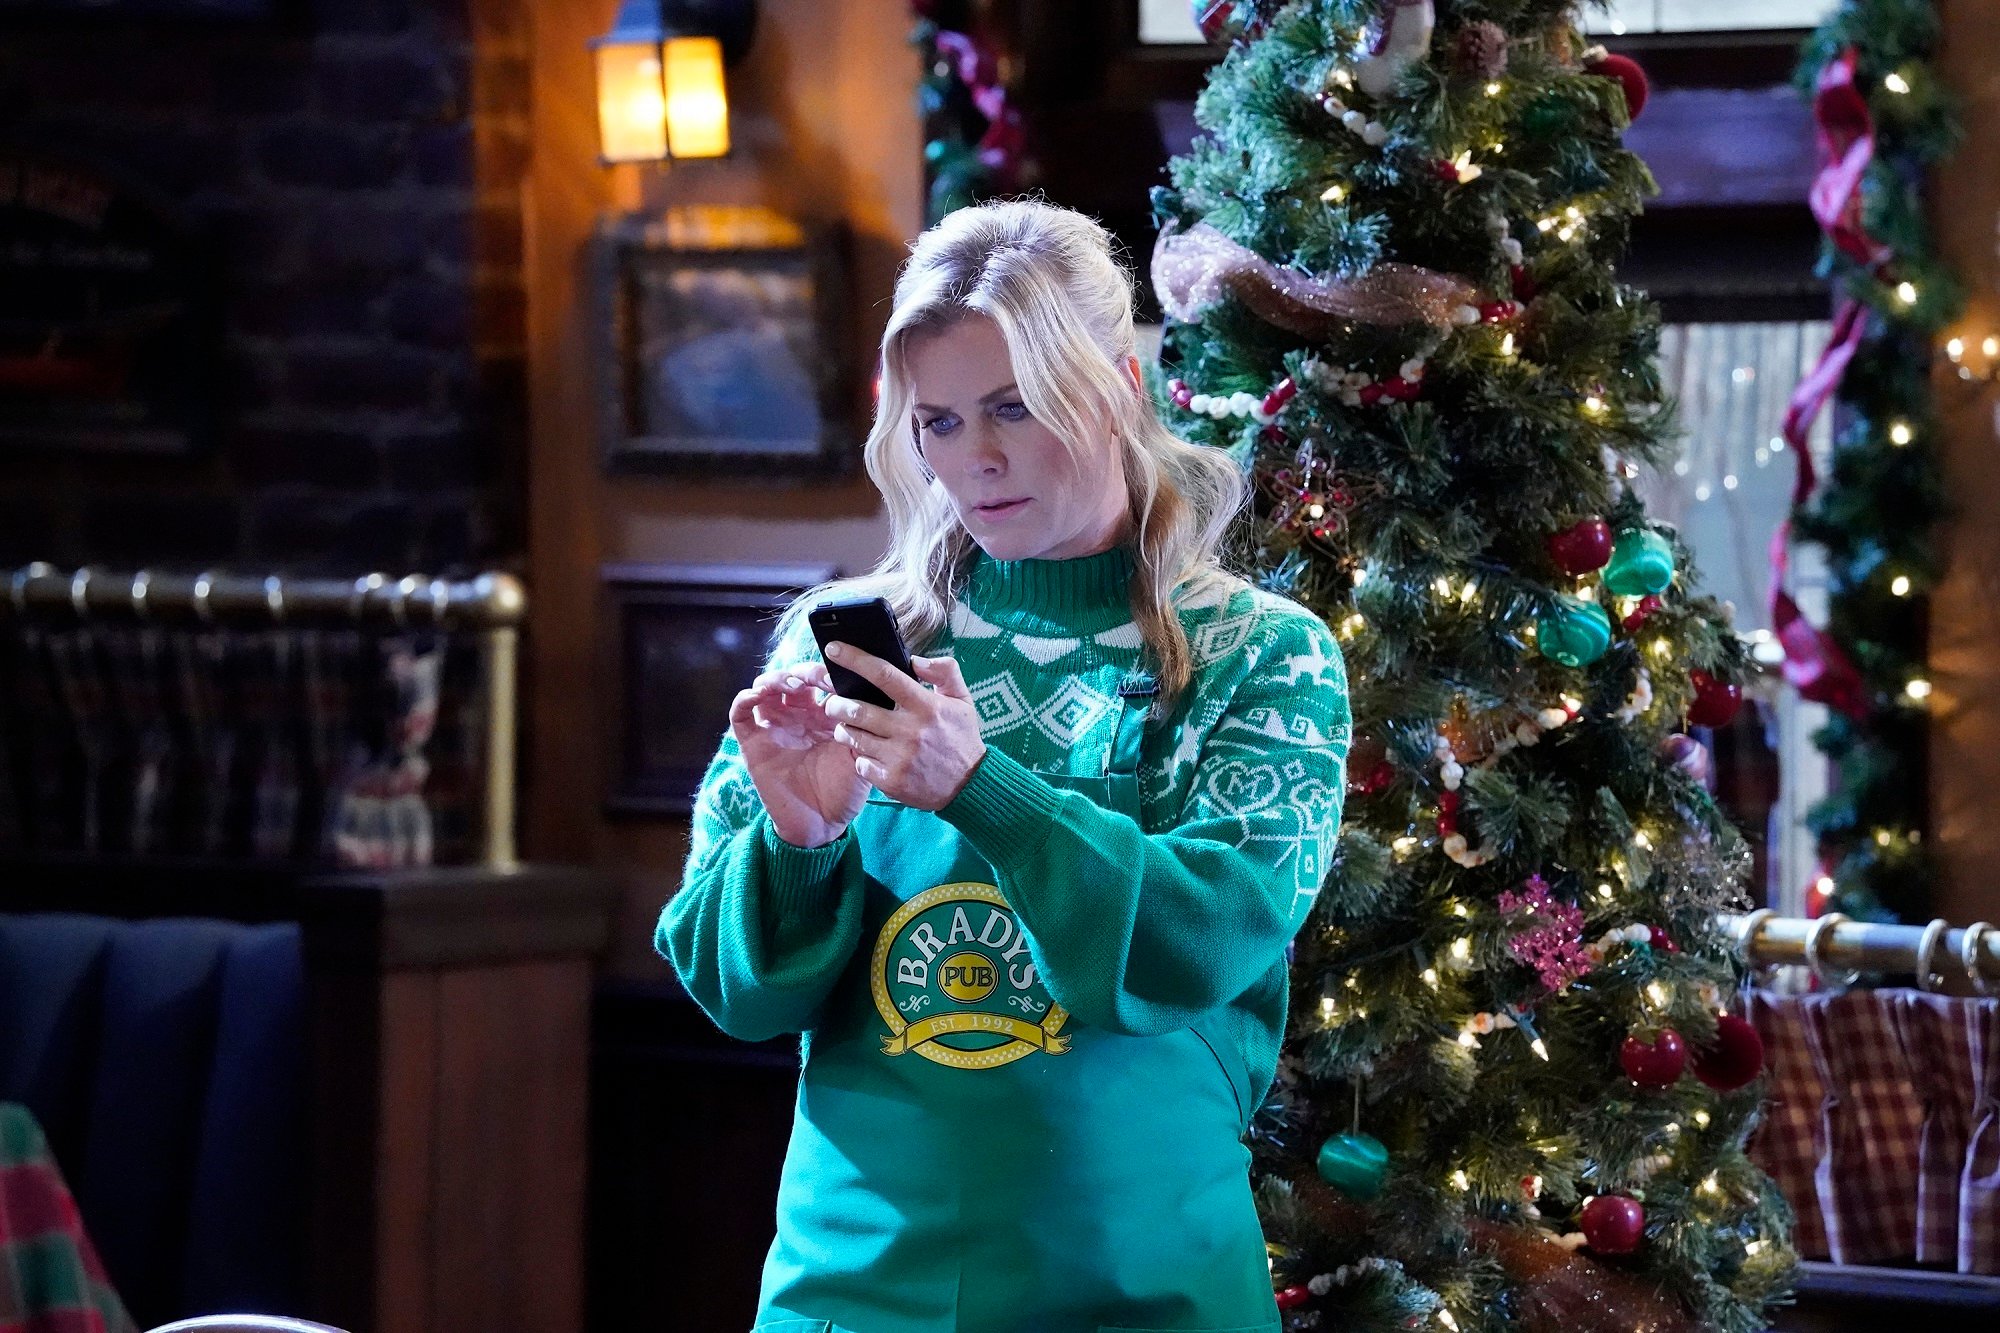 Days of Our Lives weekly recap focuses on Sami, pictured here in a green Christmas sweater